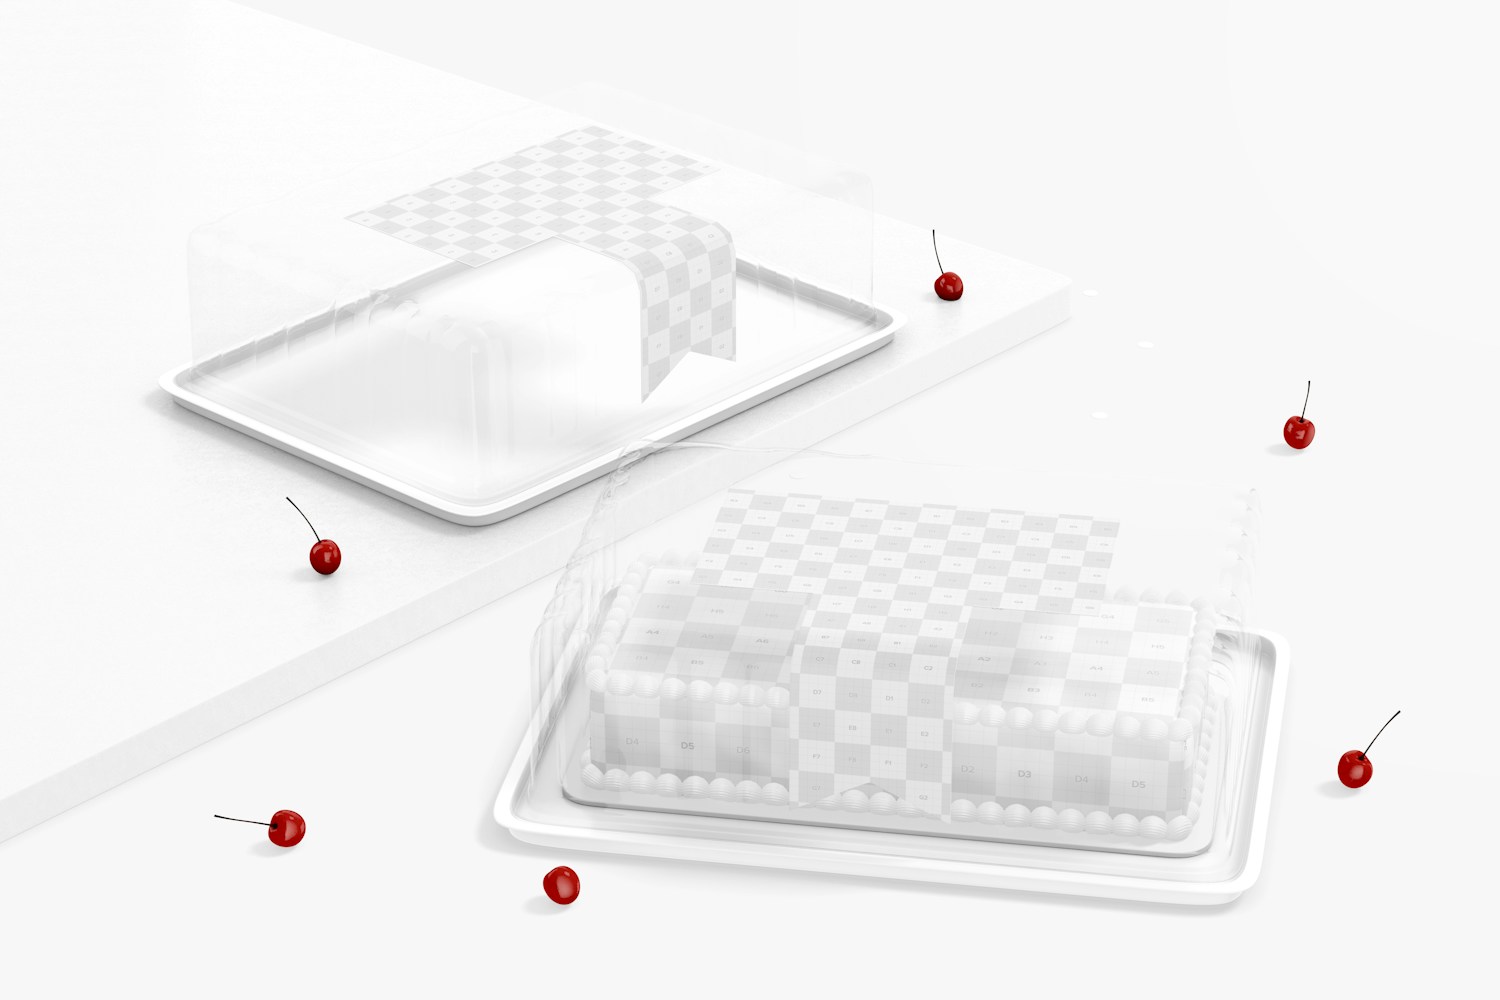 Plastic Square Cake Container Mockup, Perspective